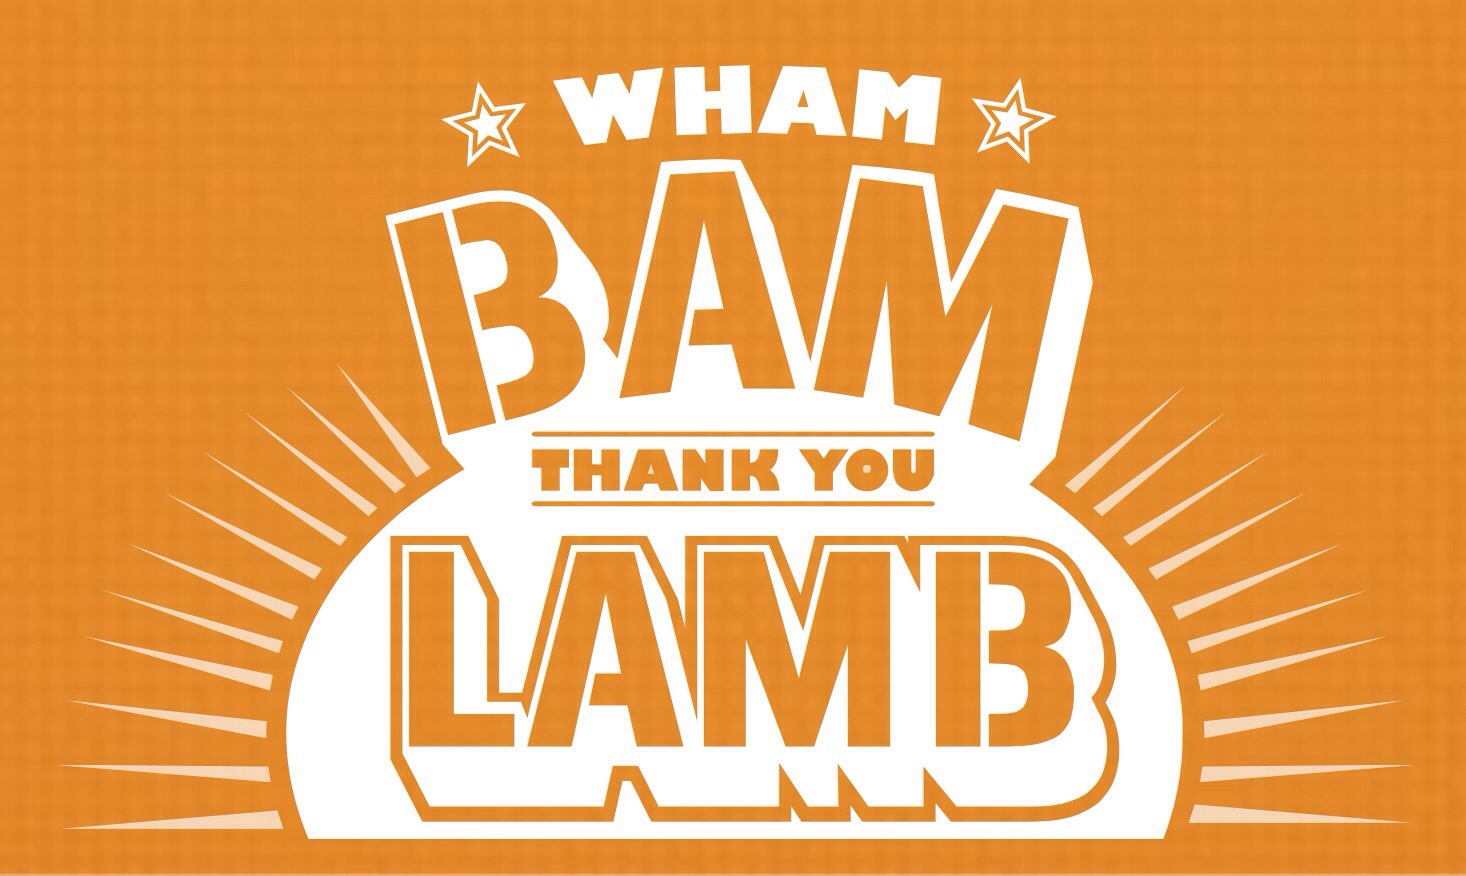 The campaign increased Scottish origin sales of lamb in Scotland increased by 10.5% in value